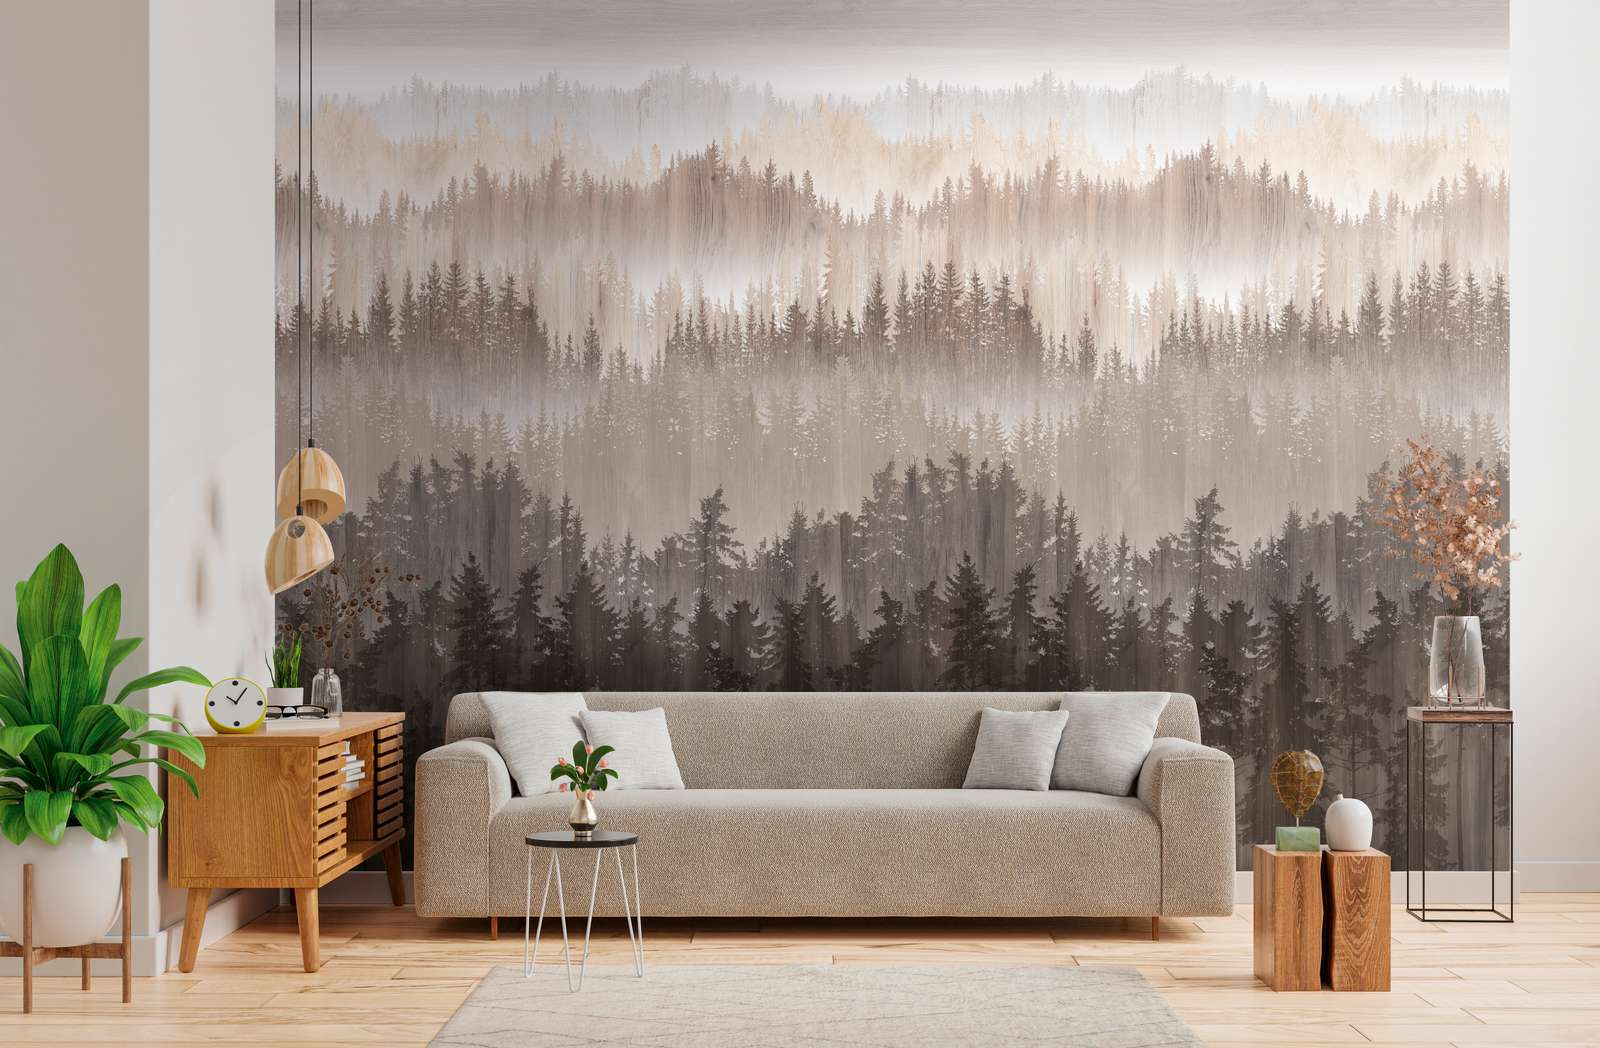             Non-woven wallpaper with suggested forest pattern - brown, beige, cream
        